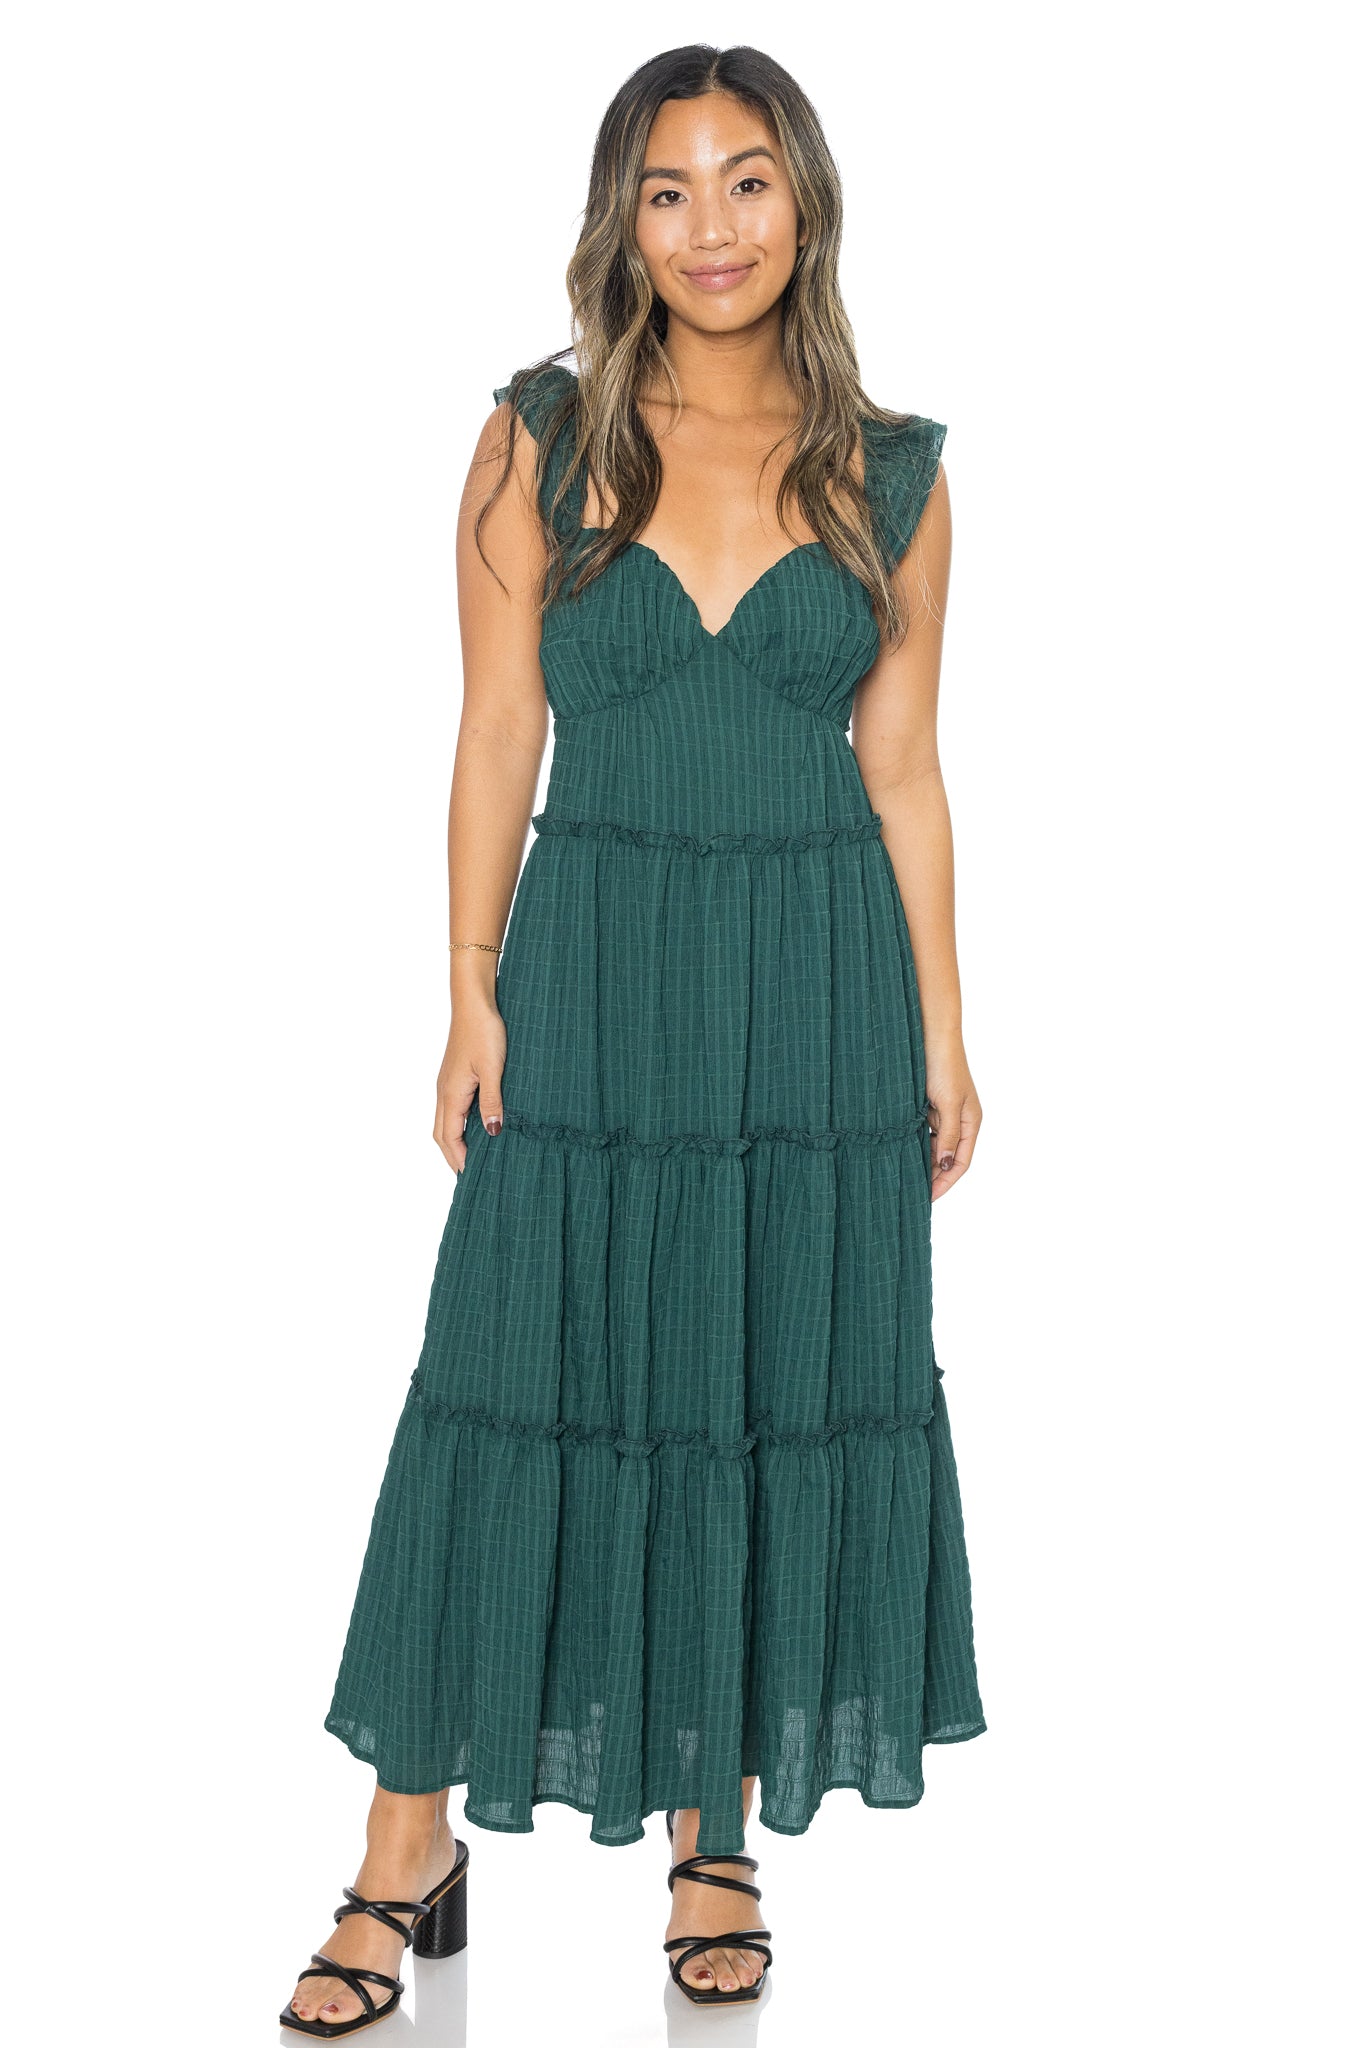 Taylor Maxi Dress by Common Collection